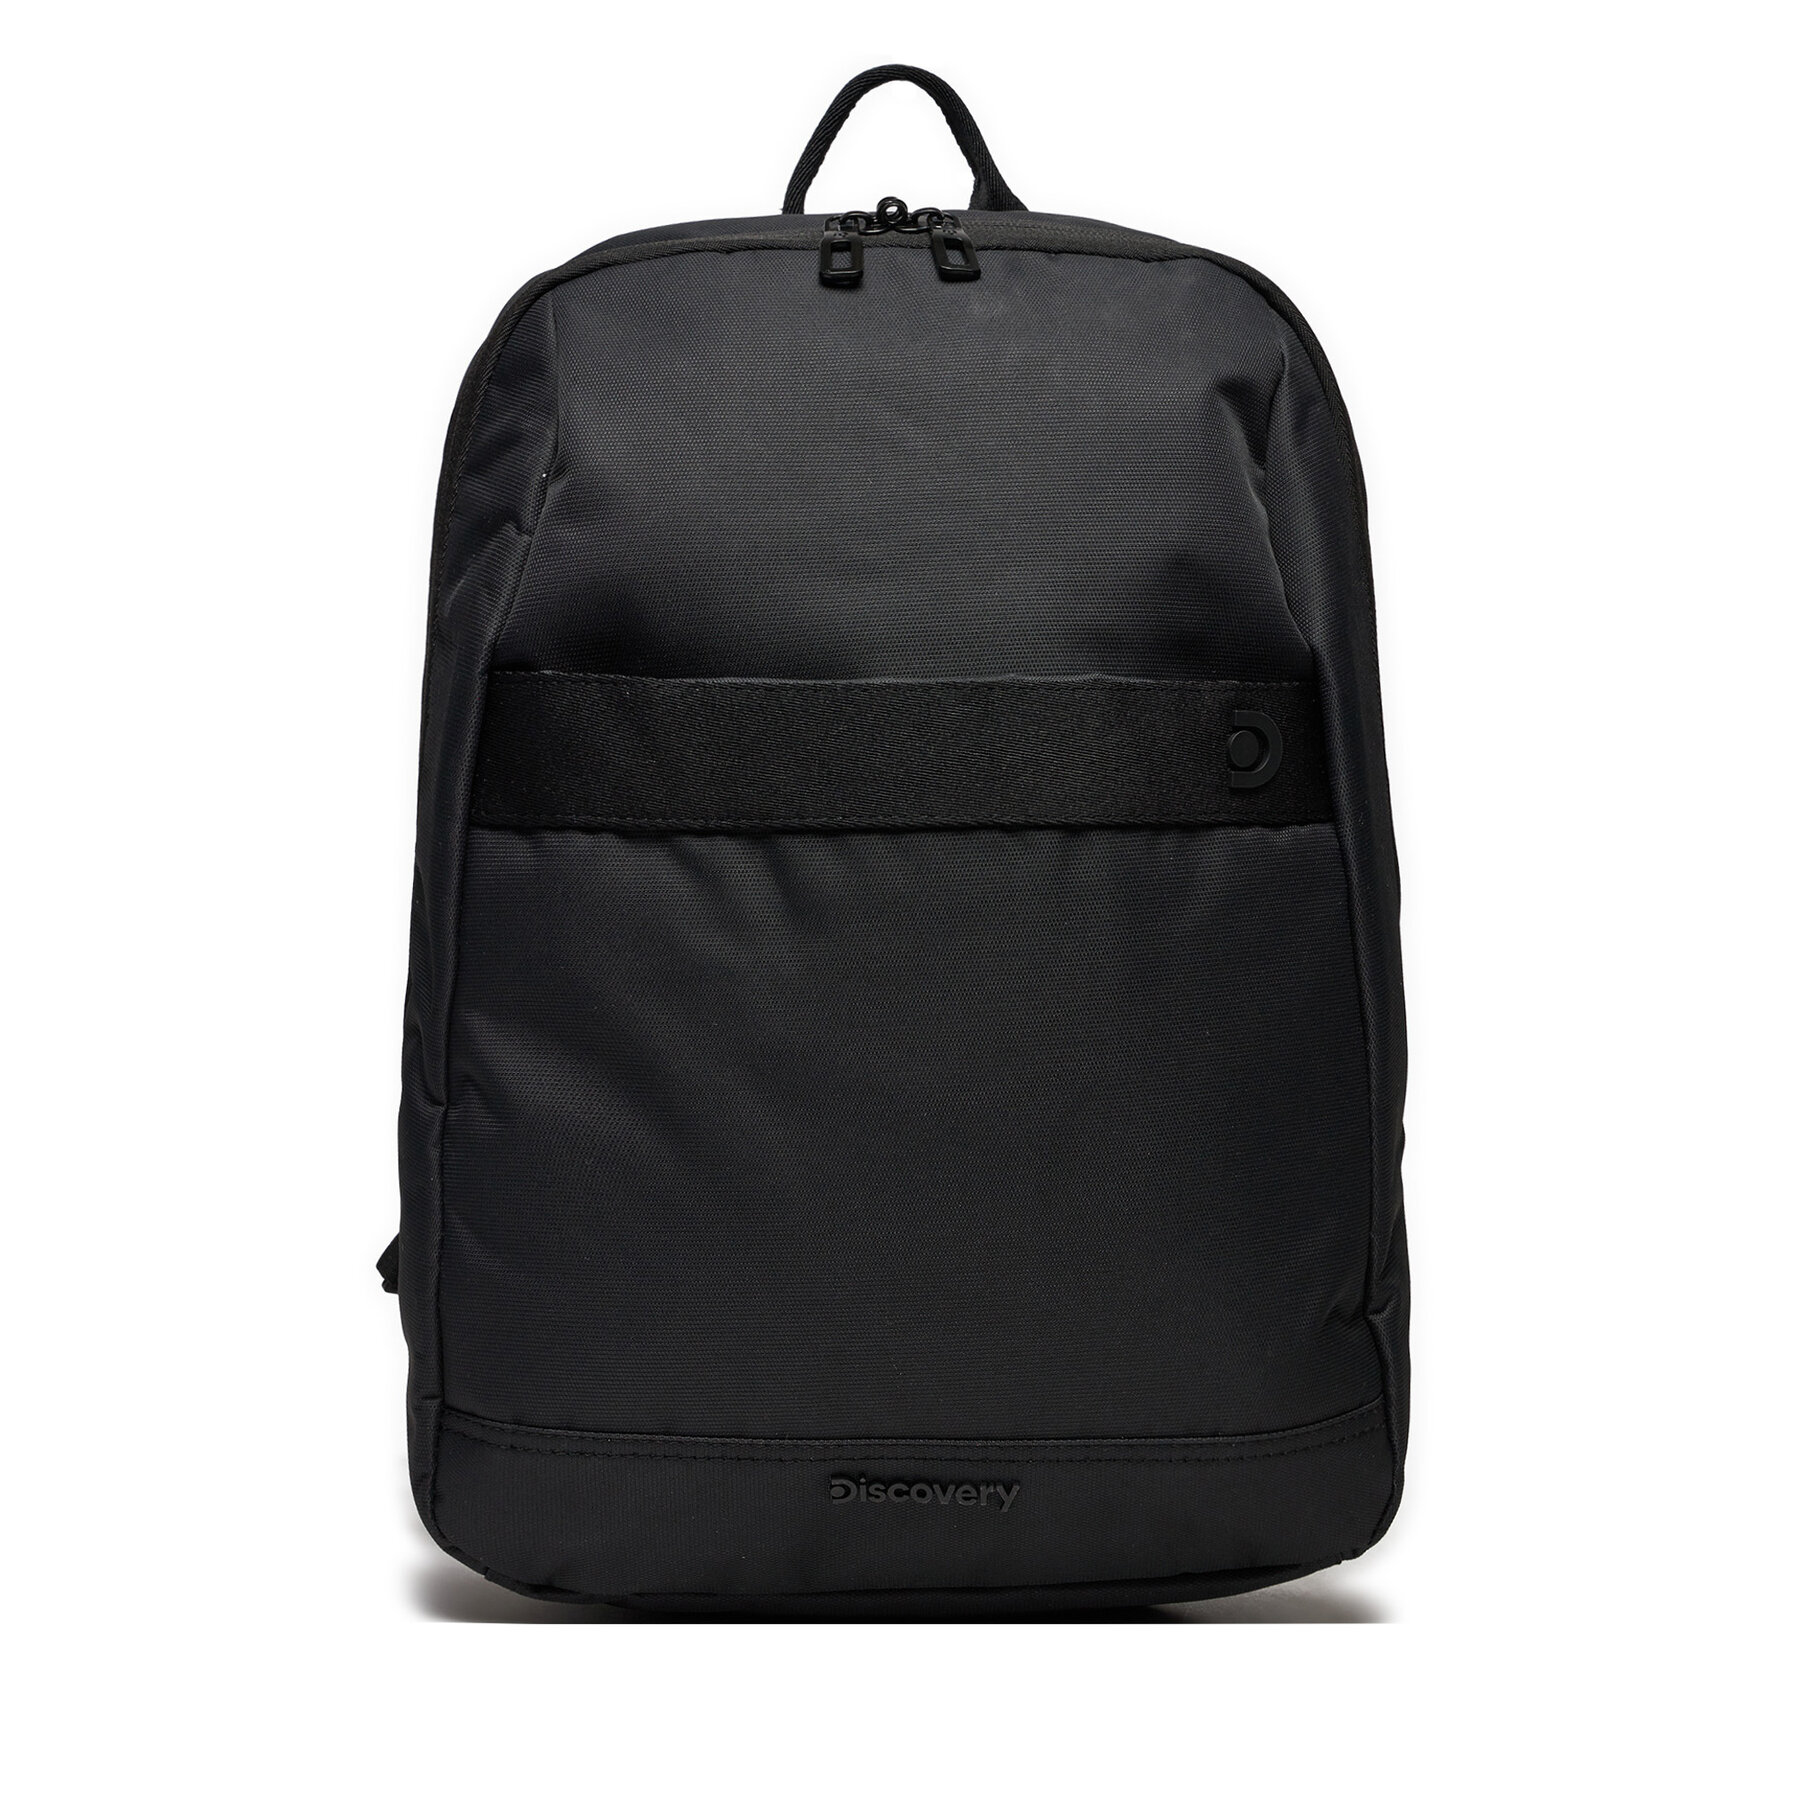 Rucksack Discovery Backpack D00940.06 Black von Discovery